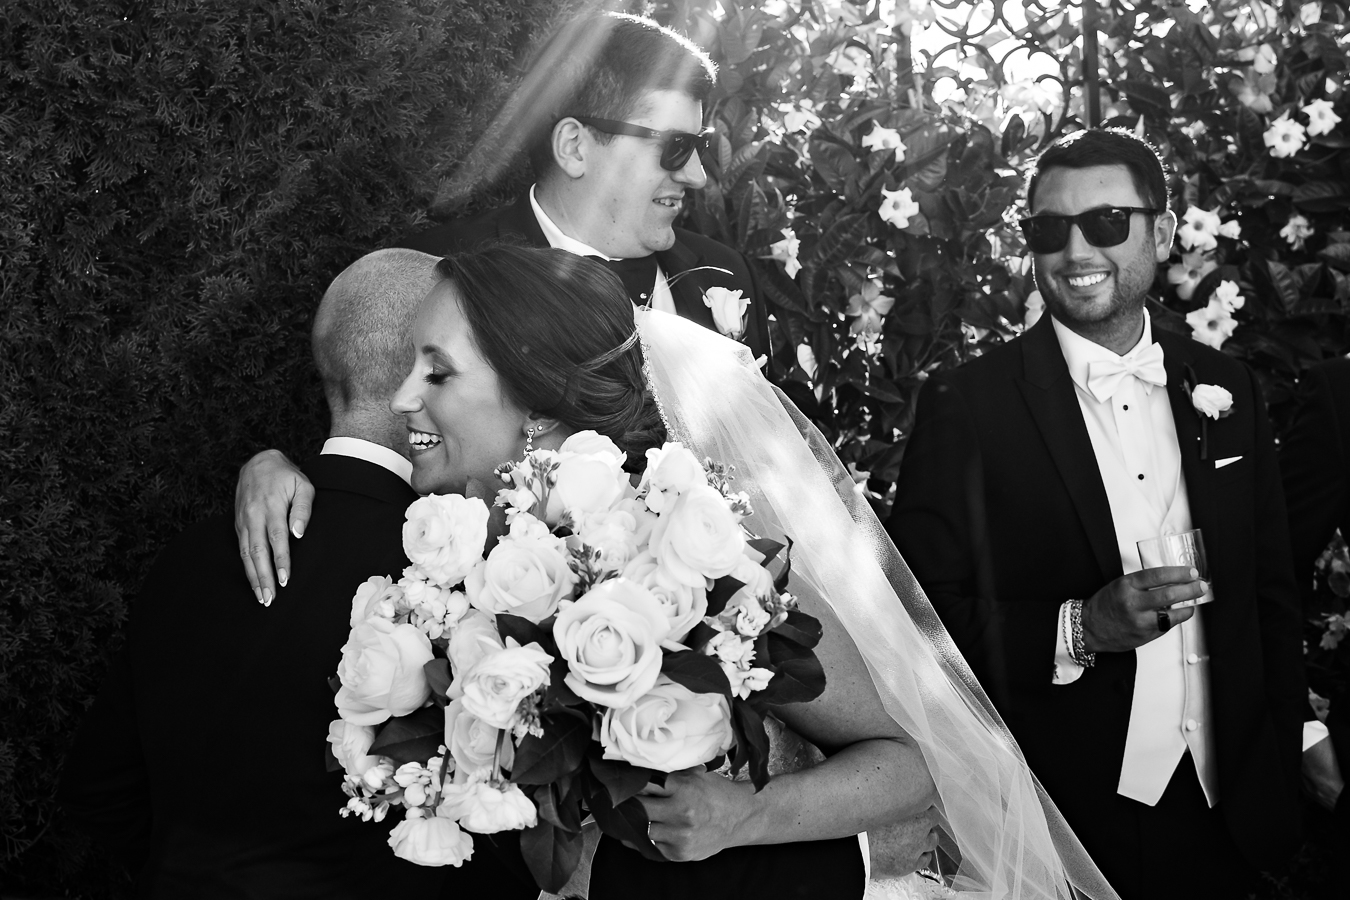 candid nj wedding photographer, lisa rhinehart, captures this black and white candid image of the bride as she hugs some groomsmen during the wedding party photos outside of the palace in NJ 